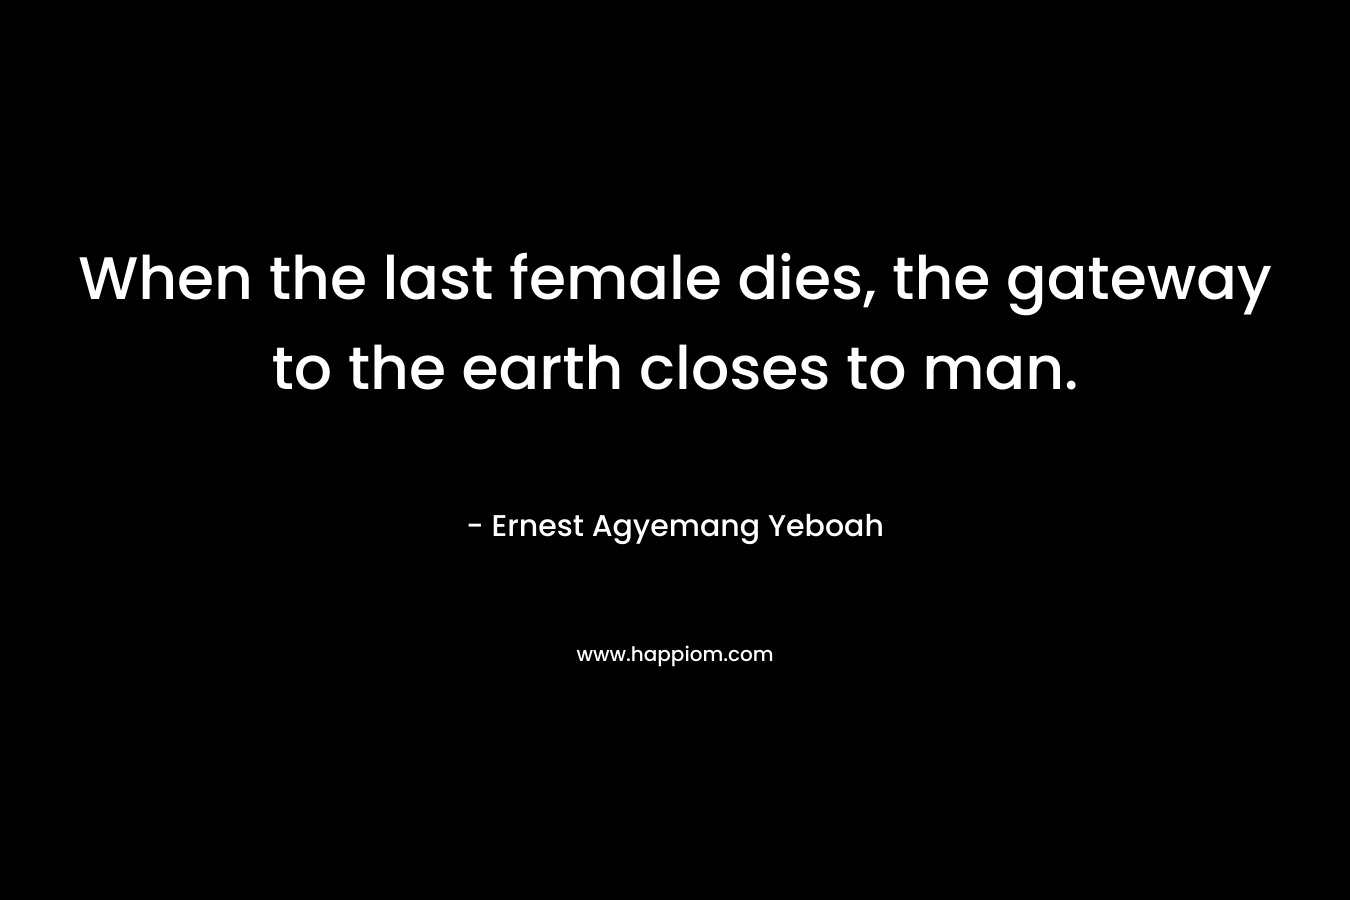 When the last female dies, the gateway to the earth closes to man.